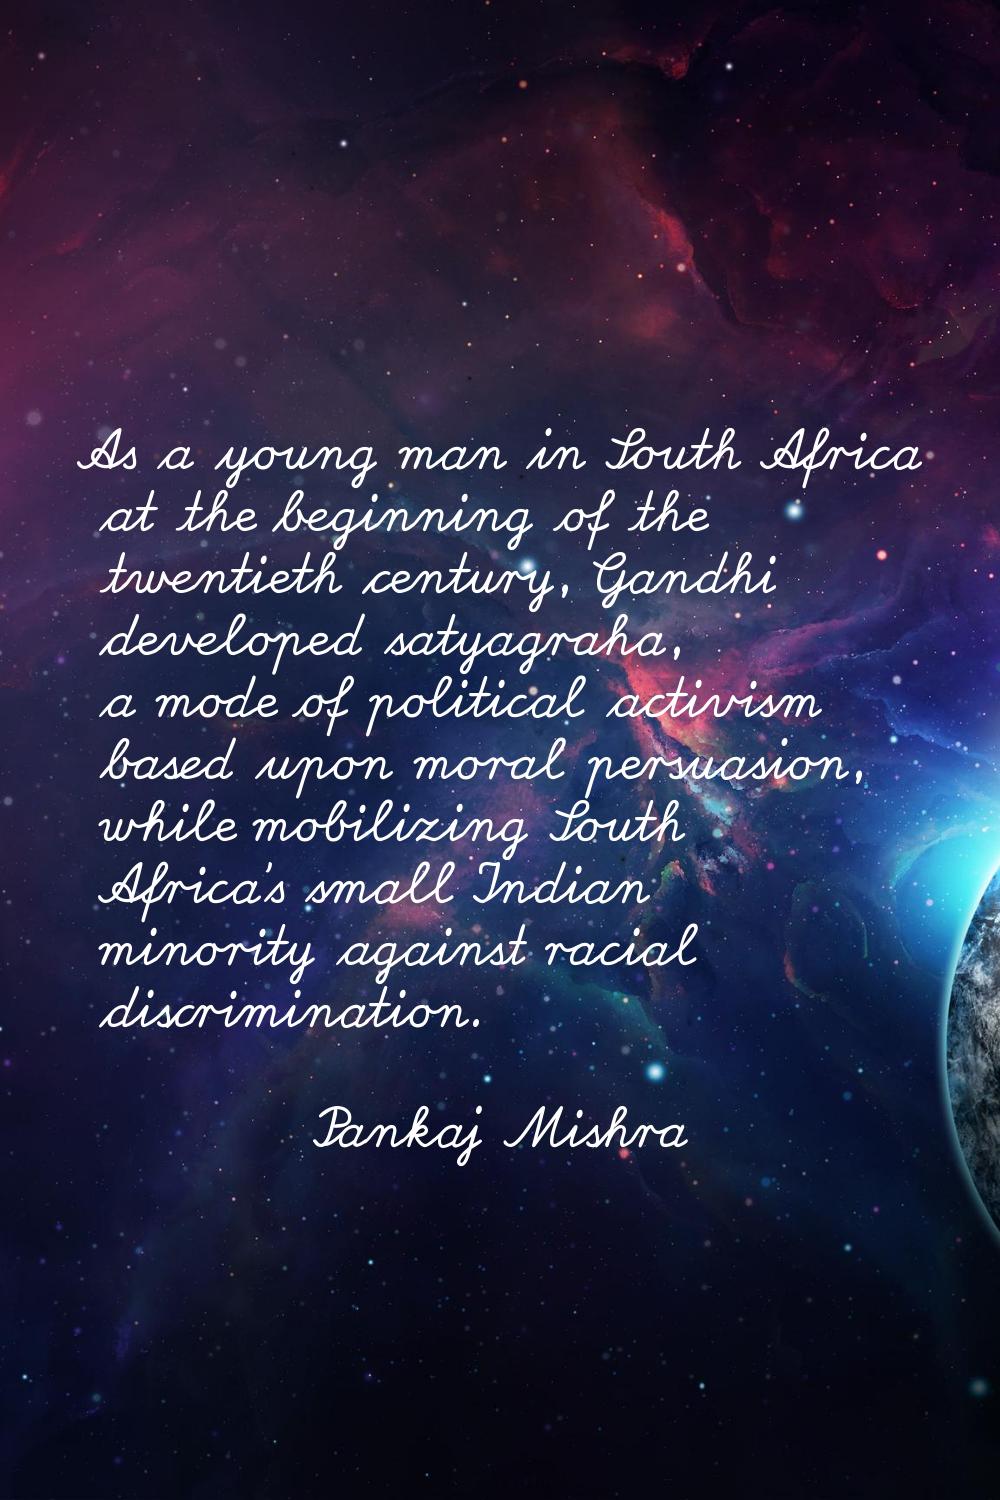 As a young man in South Africa at the beginning of the twentieth century, Gandhi developed satyagra